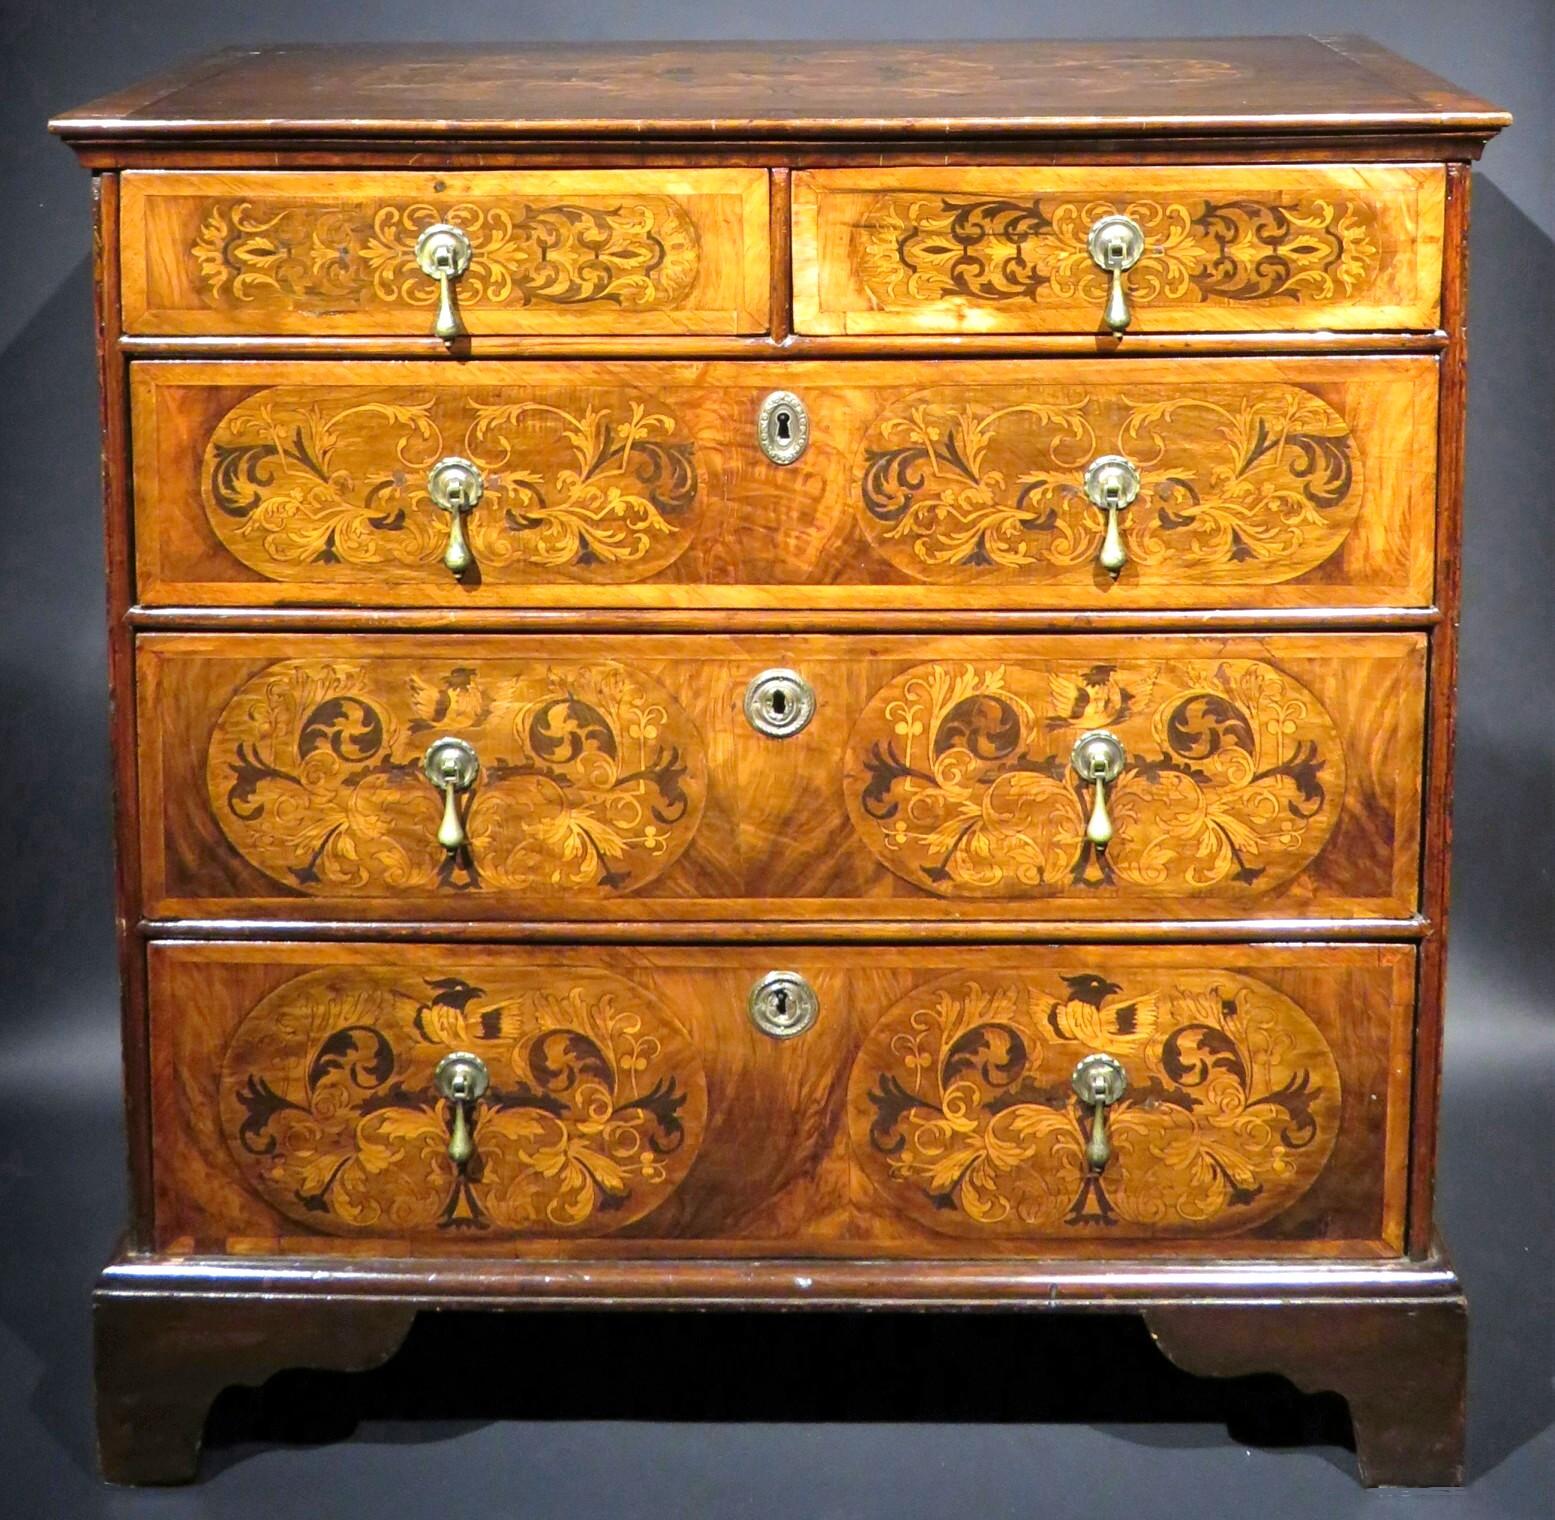 An outstanding and finely proportioned William & Mary walnut chest of drawers, the case showing a cross-banded and inlaid top above a pair of short drawers overtop three tiers of graduated full width drawers, their fronts featuring marquetry motifs